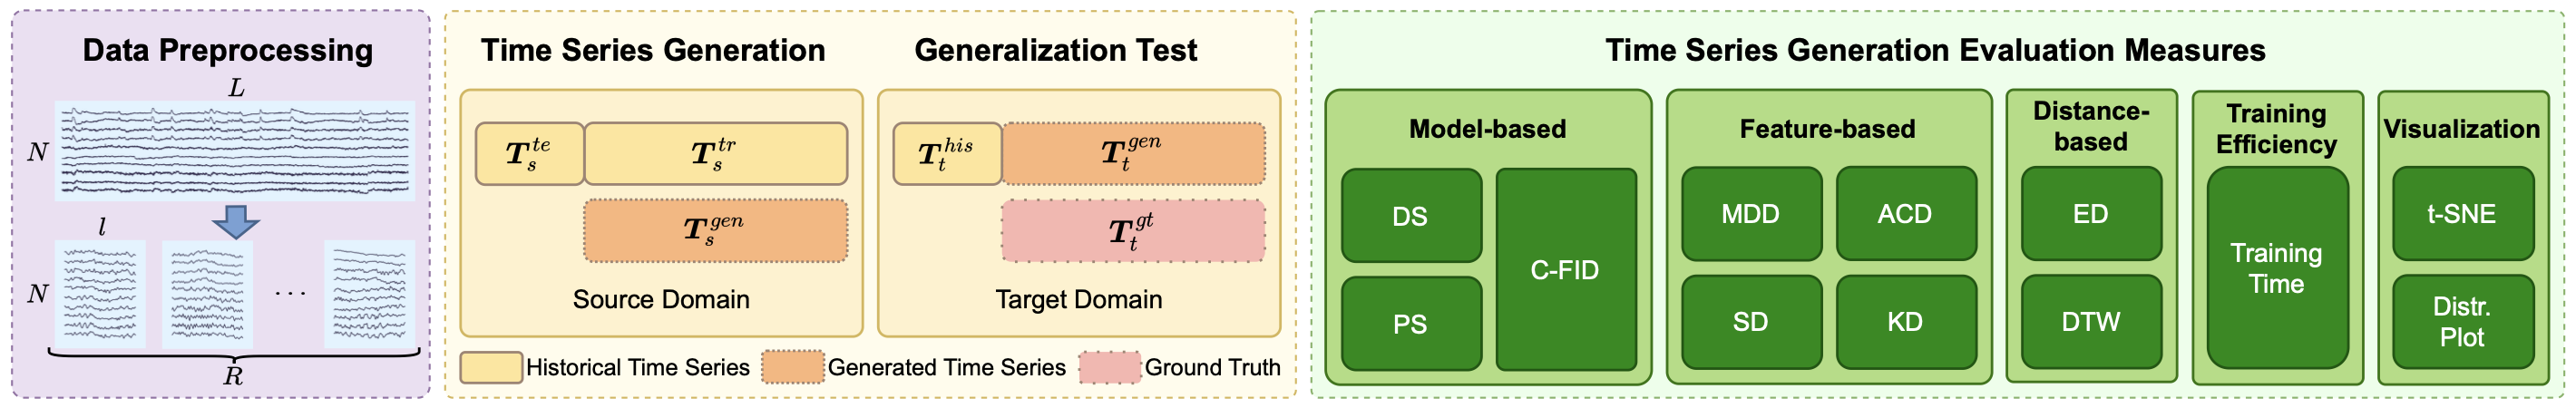 Overall Architecture of TSGBench